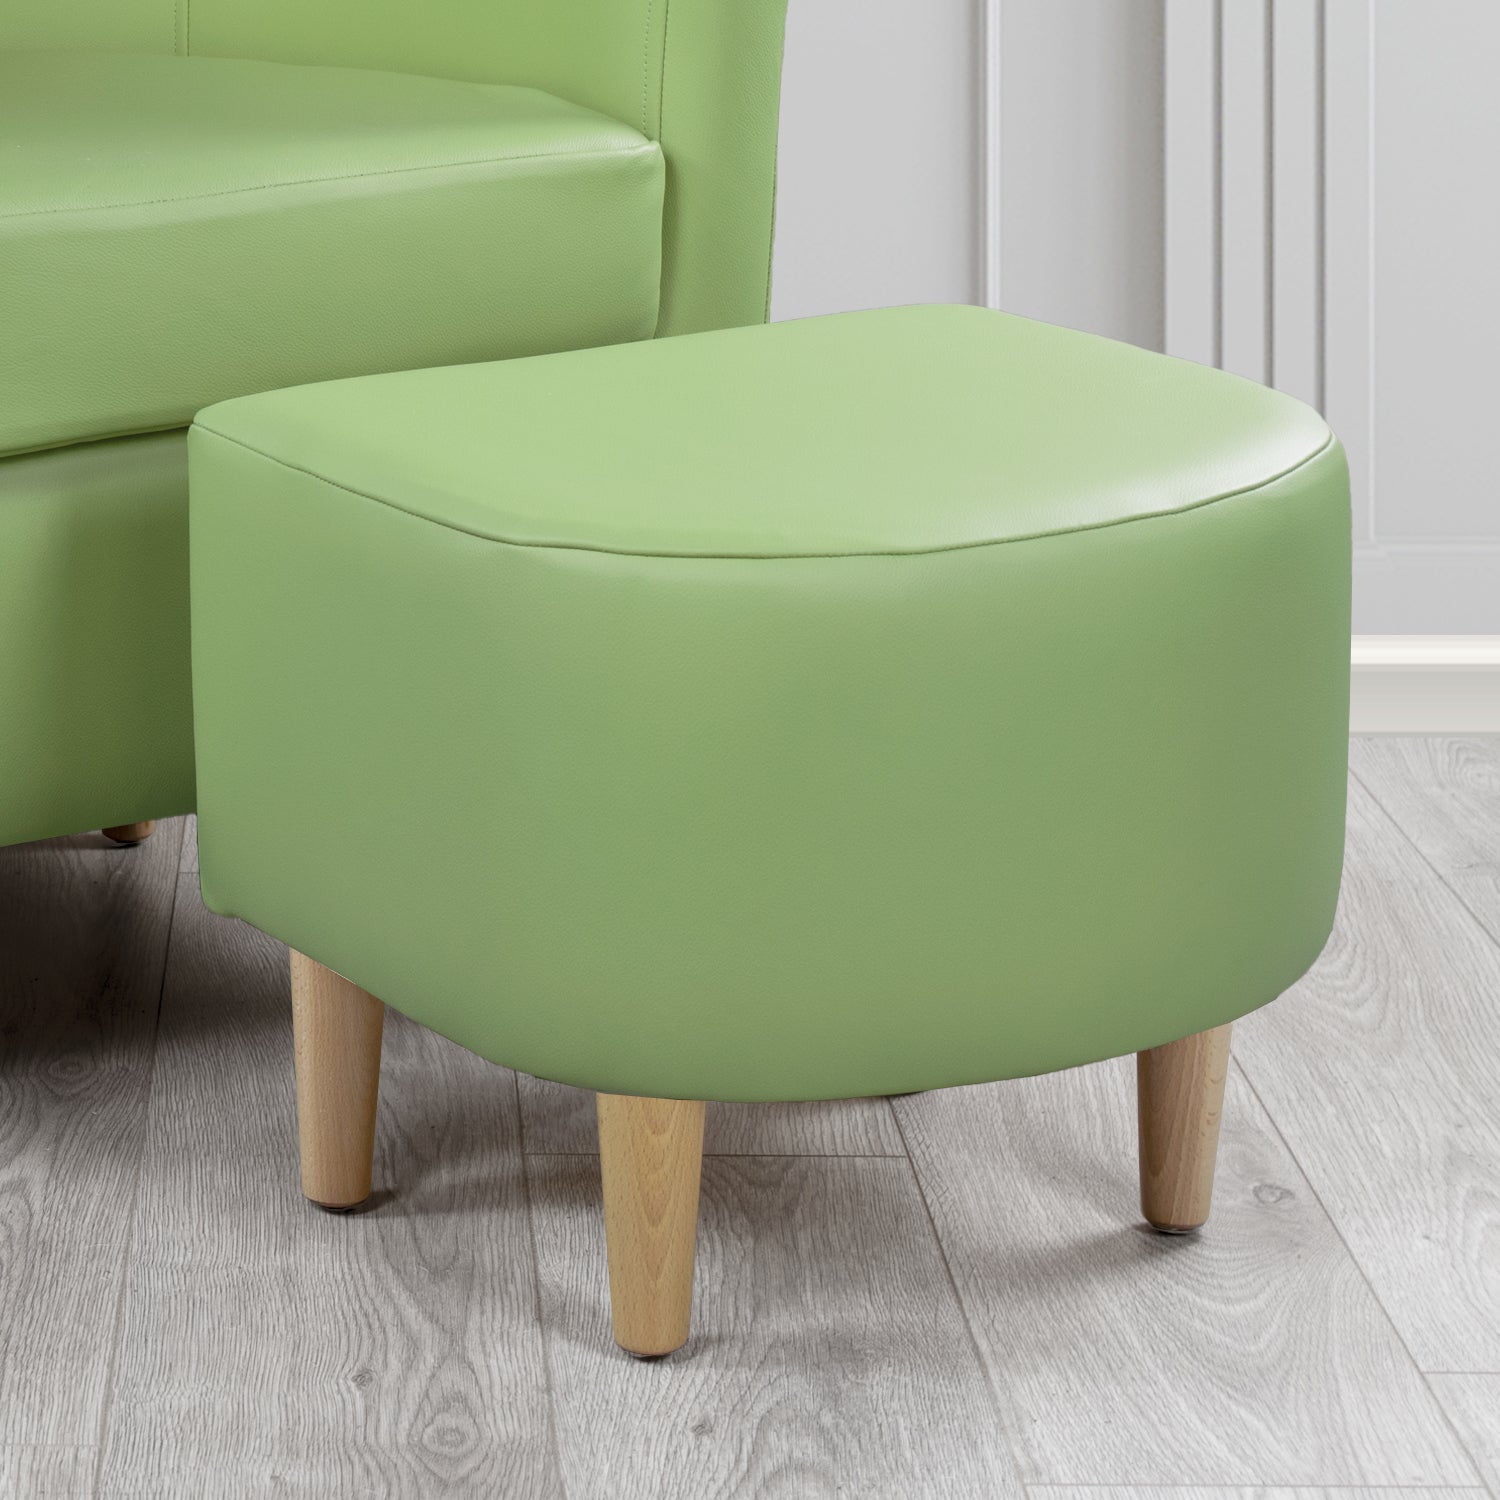 St Tropez Shelly Pea Green Crib 5 Genuine Leather Footstool (4631427219498)